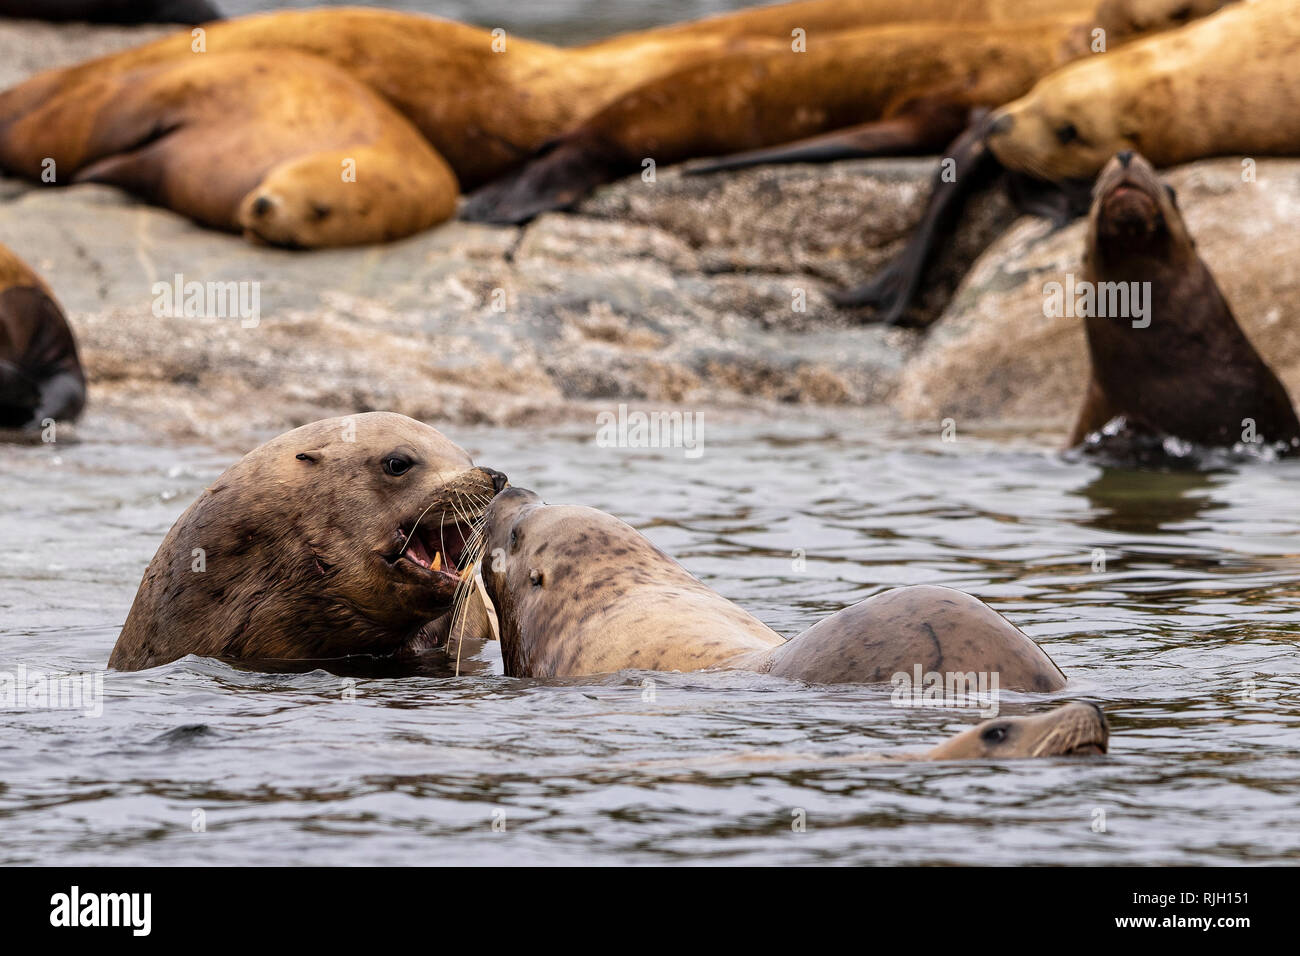 Steller's sea lions growling at each other along the Great Bear Rainforest, British Columbia Coast, First Nations Territory, Canada. Stock Photo